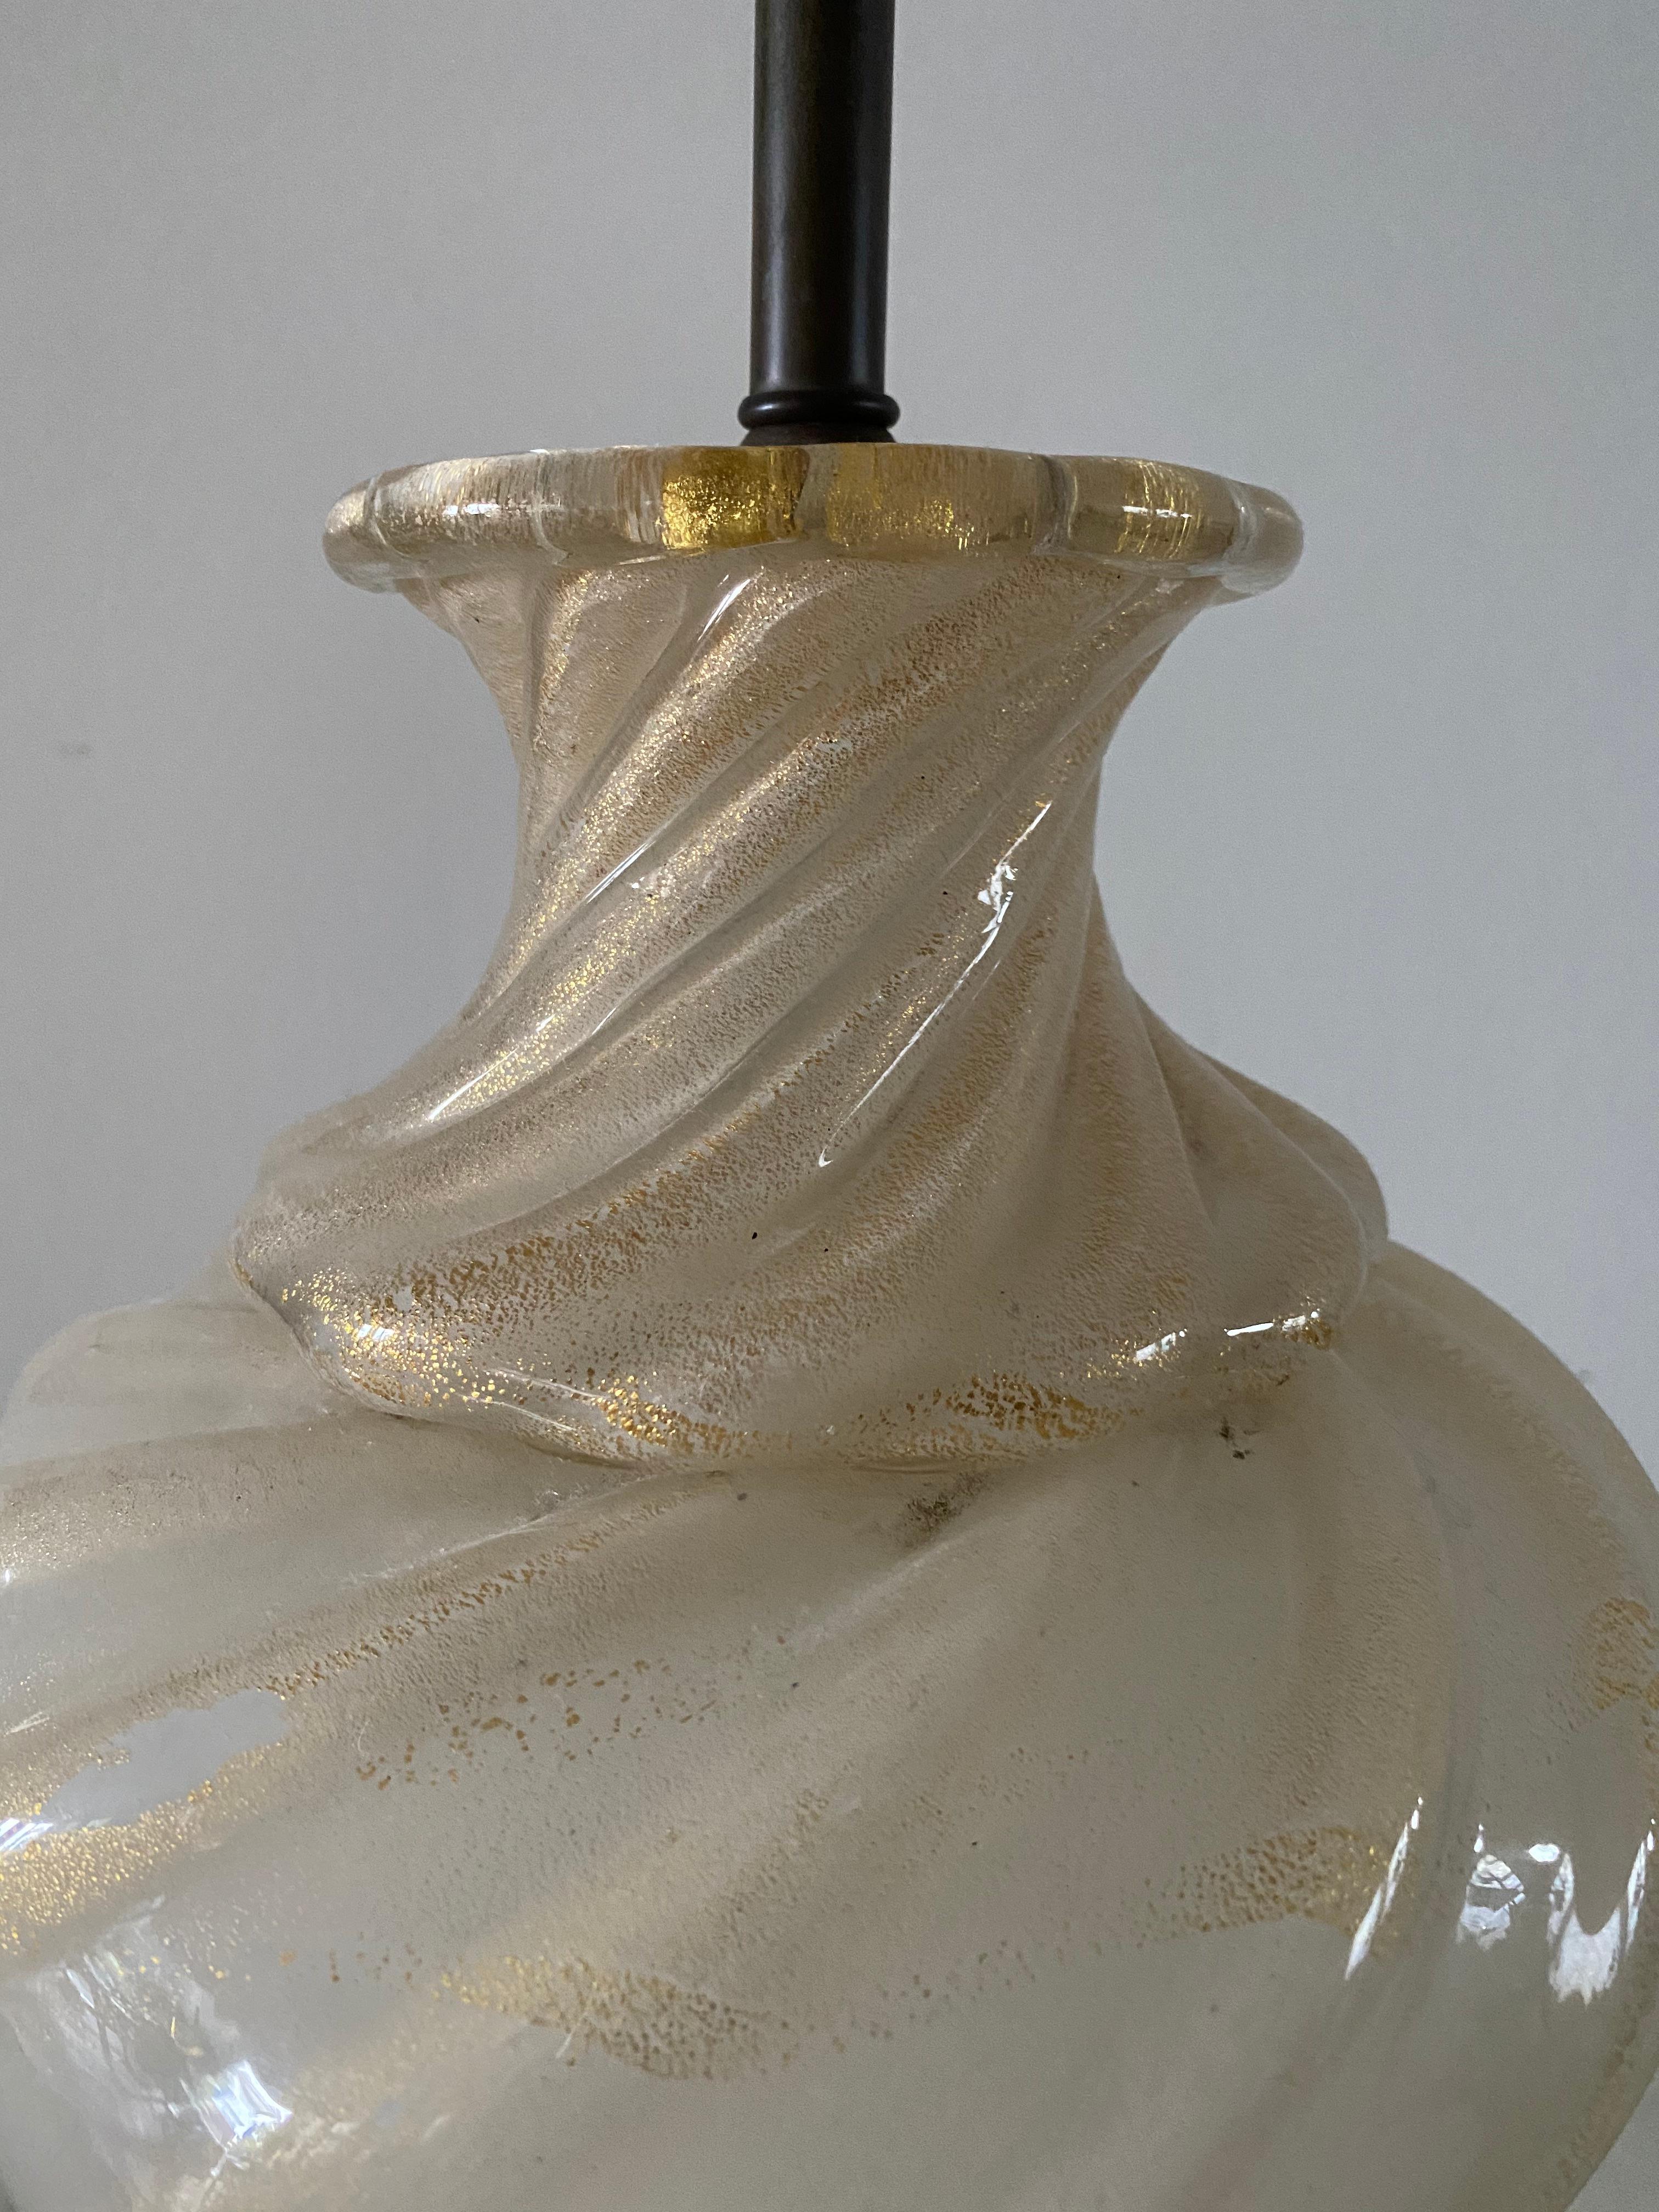 Fired Classic Murano Glass Lamp, Barovier & Toso, Italian, 1950s For Sale